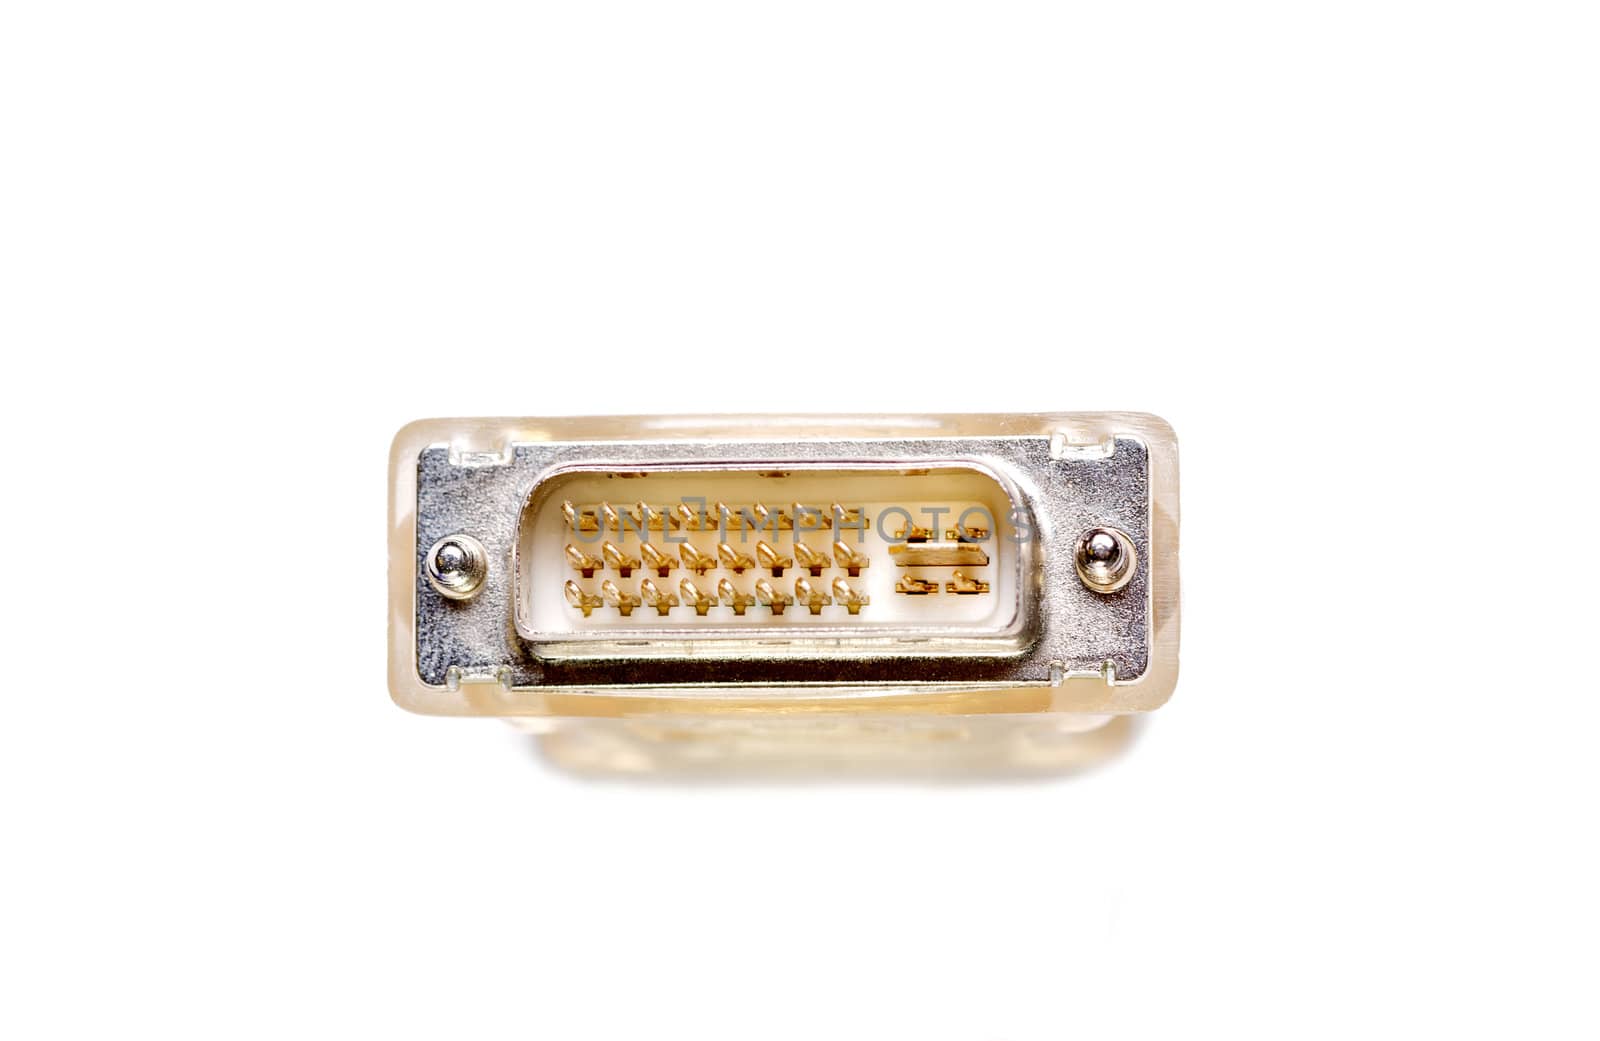 Computer connector jack isolated on white